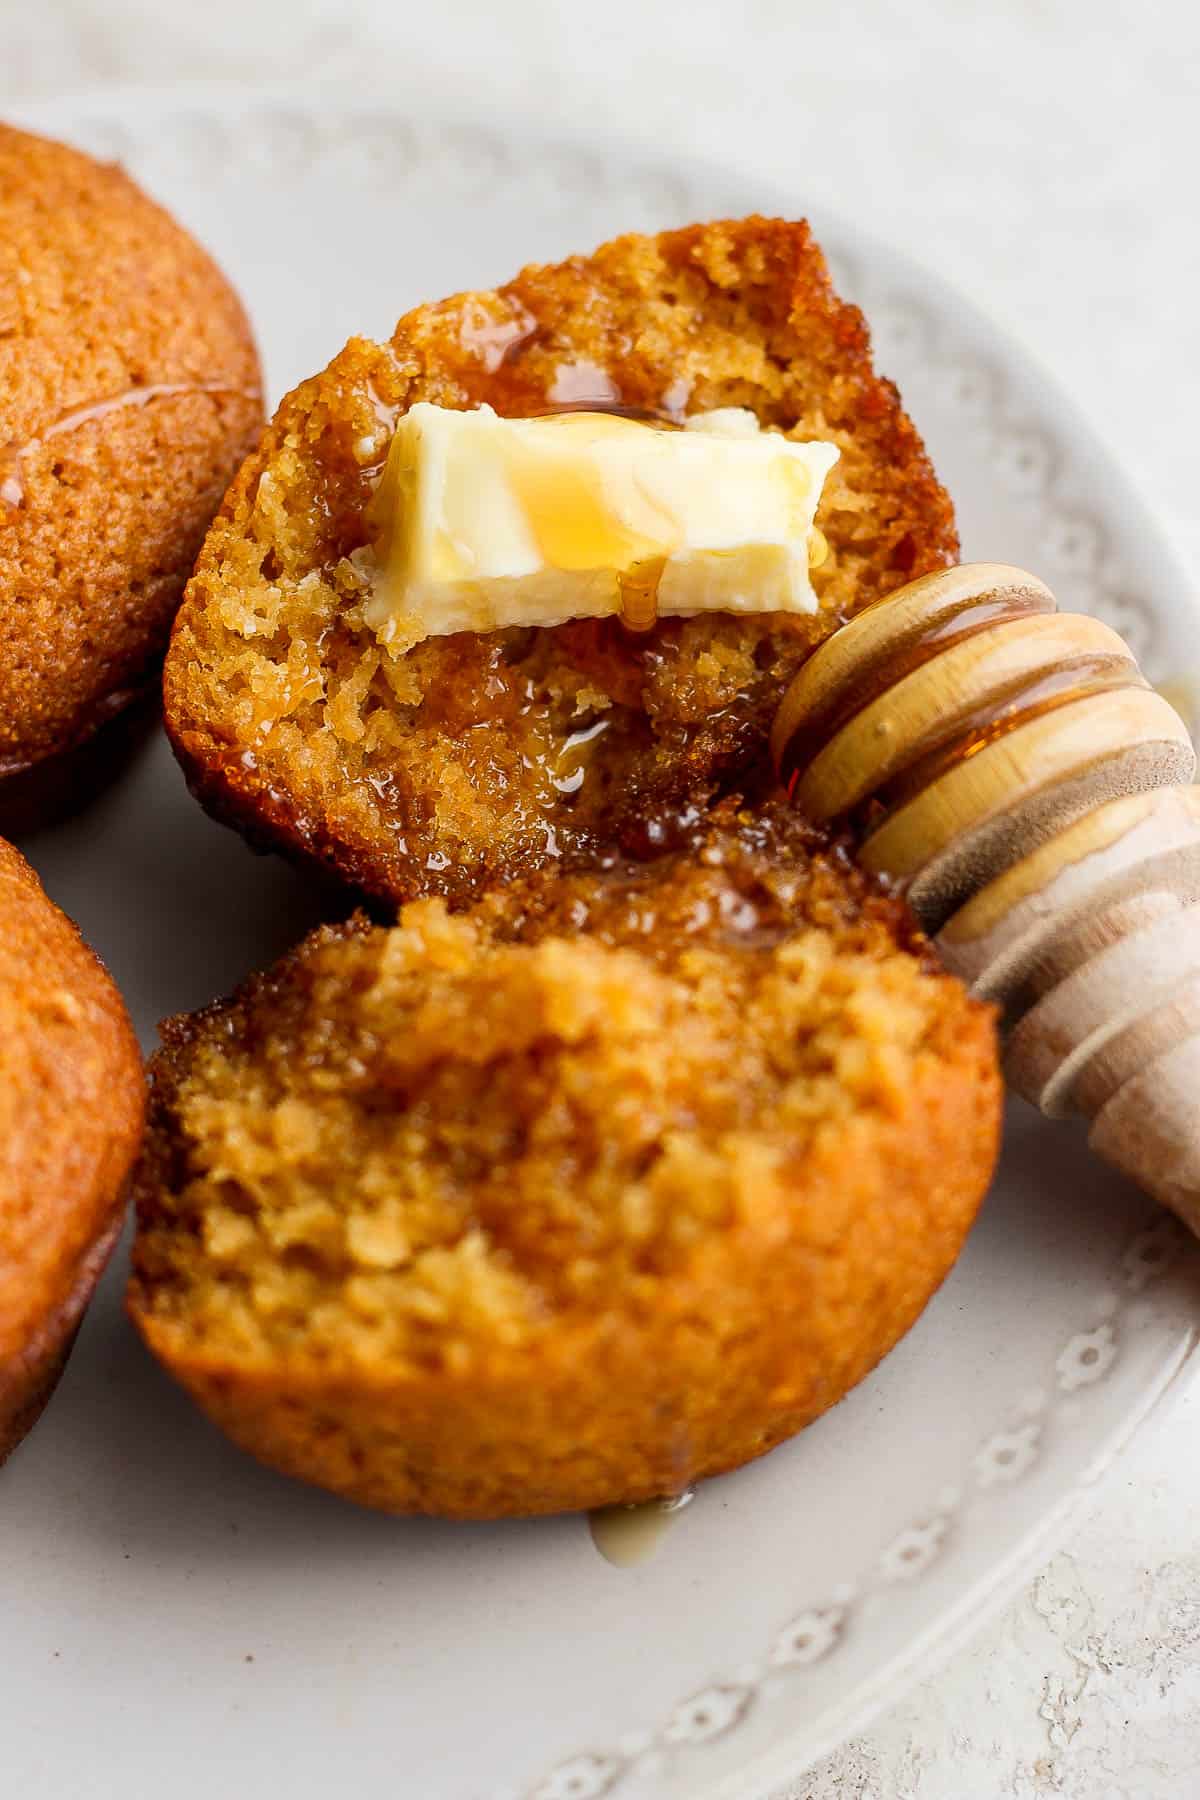 A cornbread muffin split in half with some butter and honey on top.